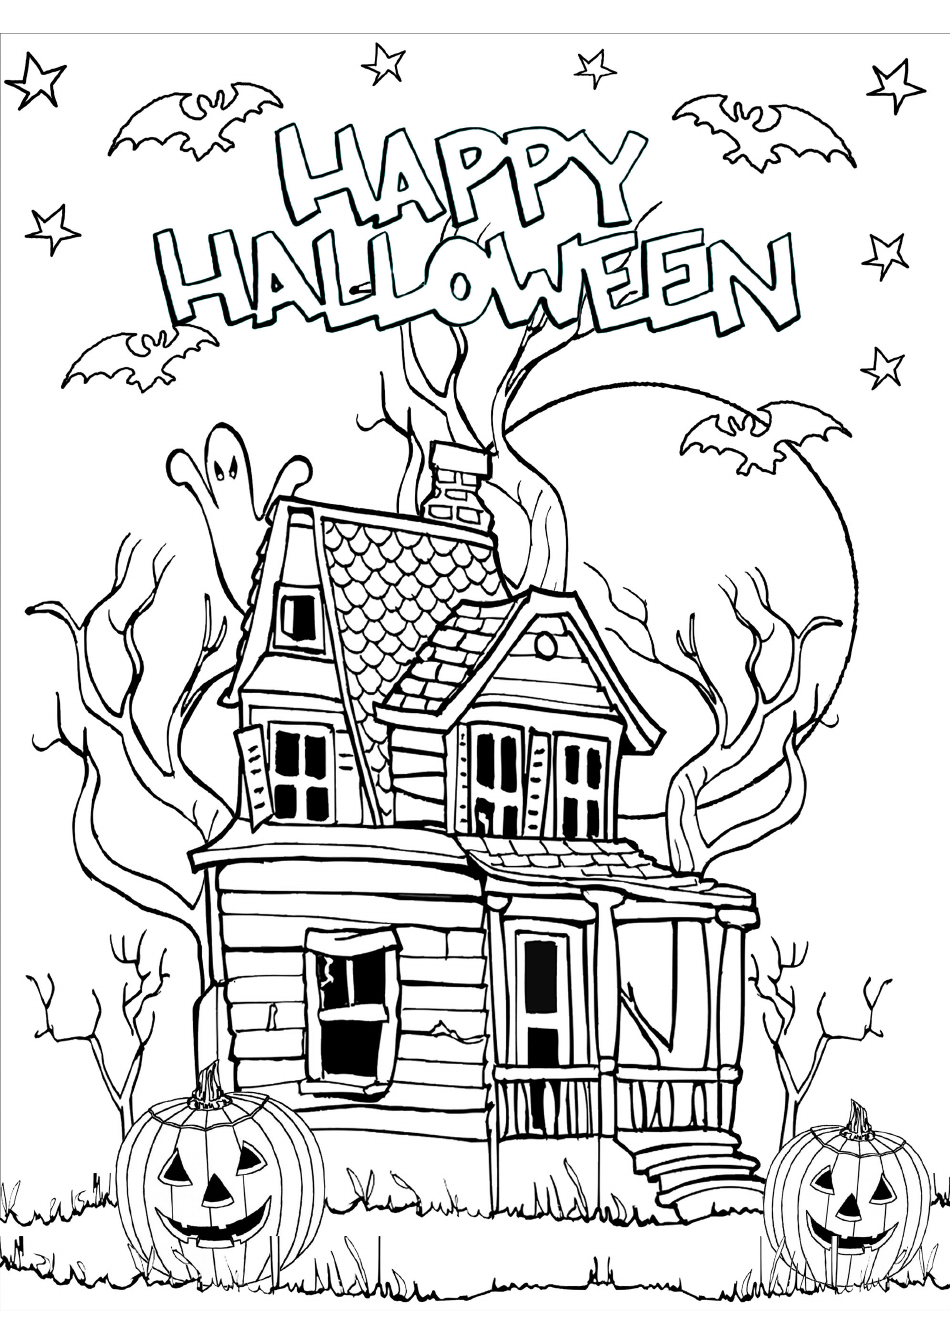 Halloween Coloring Sheet - Big House, Page 1